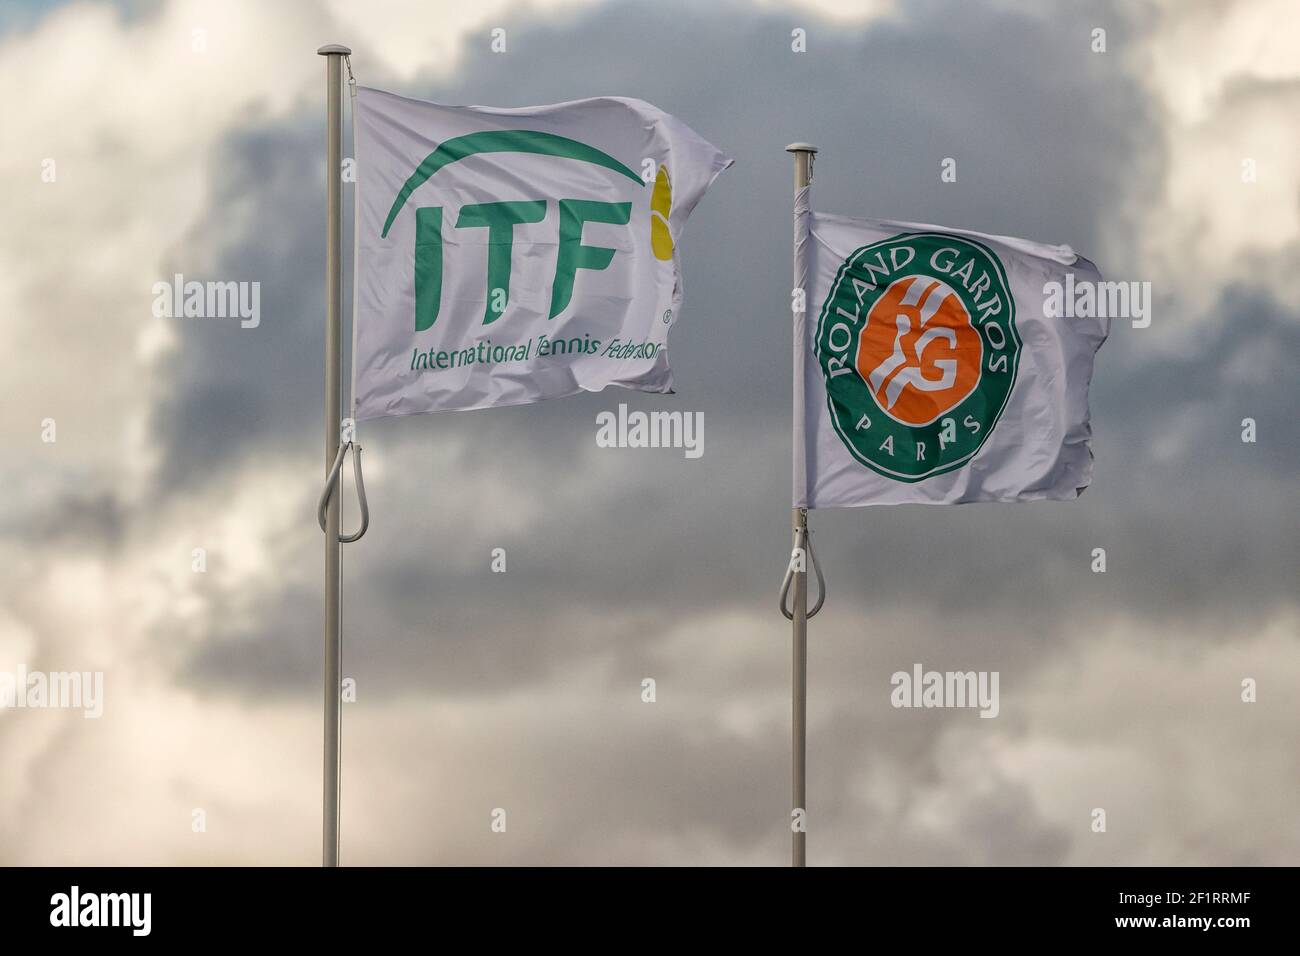 Roland Garros and ITF flags over the rooftop of Philippe Chatrier stadium  during the Roland Garros 2020, Grand Slam tennis tournament, on October 5,  2020 at Roland Garros stadium in Paris, France -